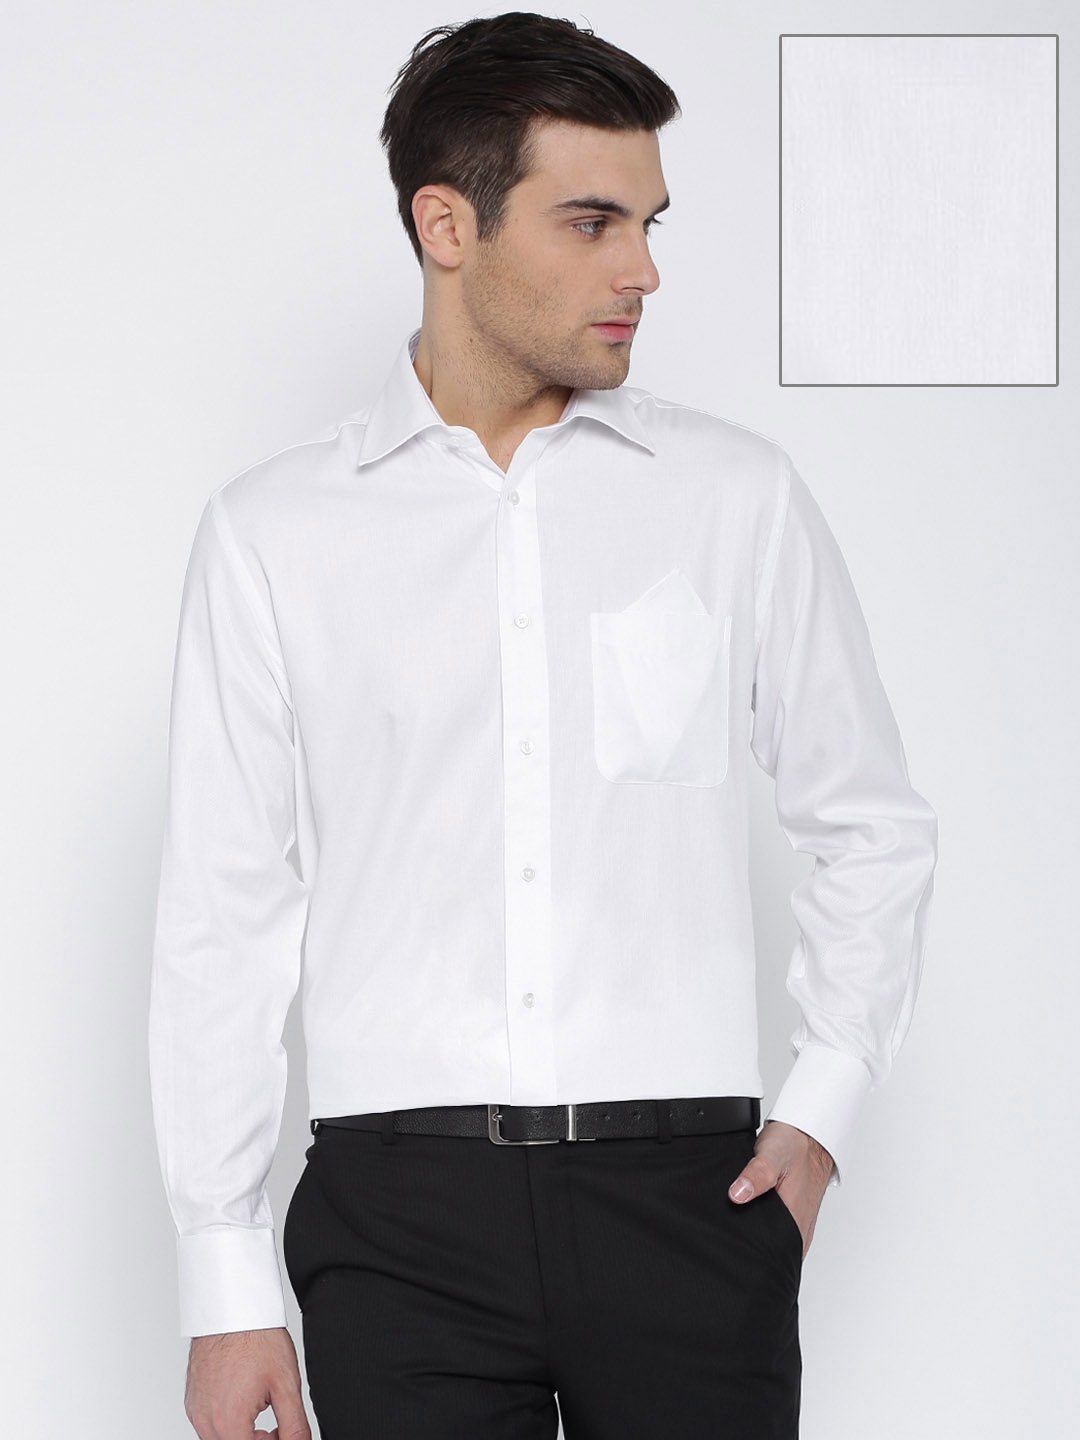 Buy Park Avenue Luxus White Formal Shirt - Shirts for Men 1301784 | Myntra